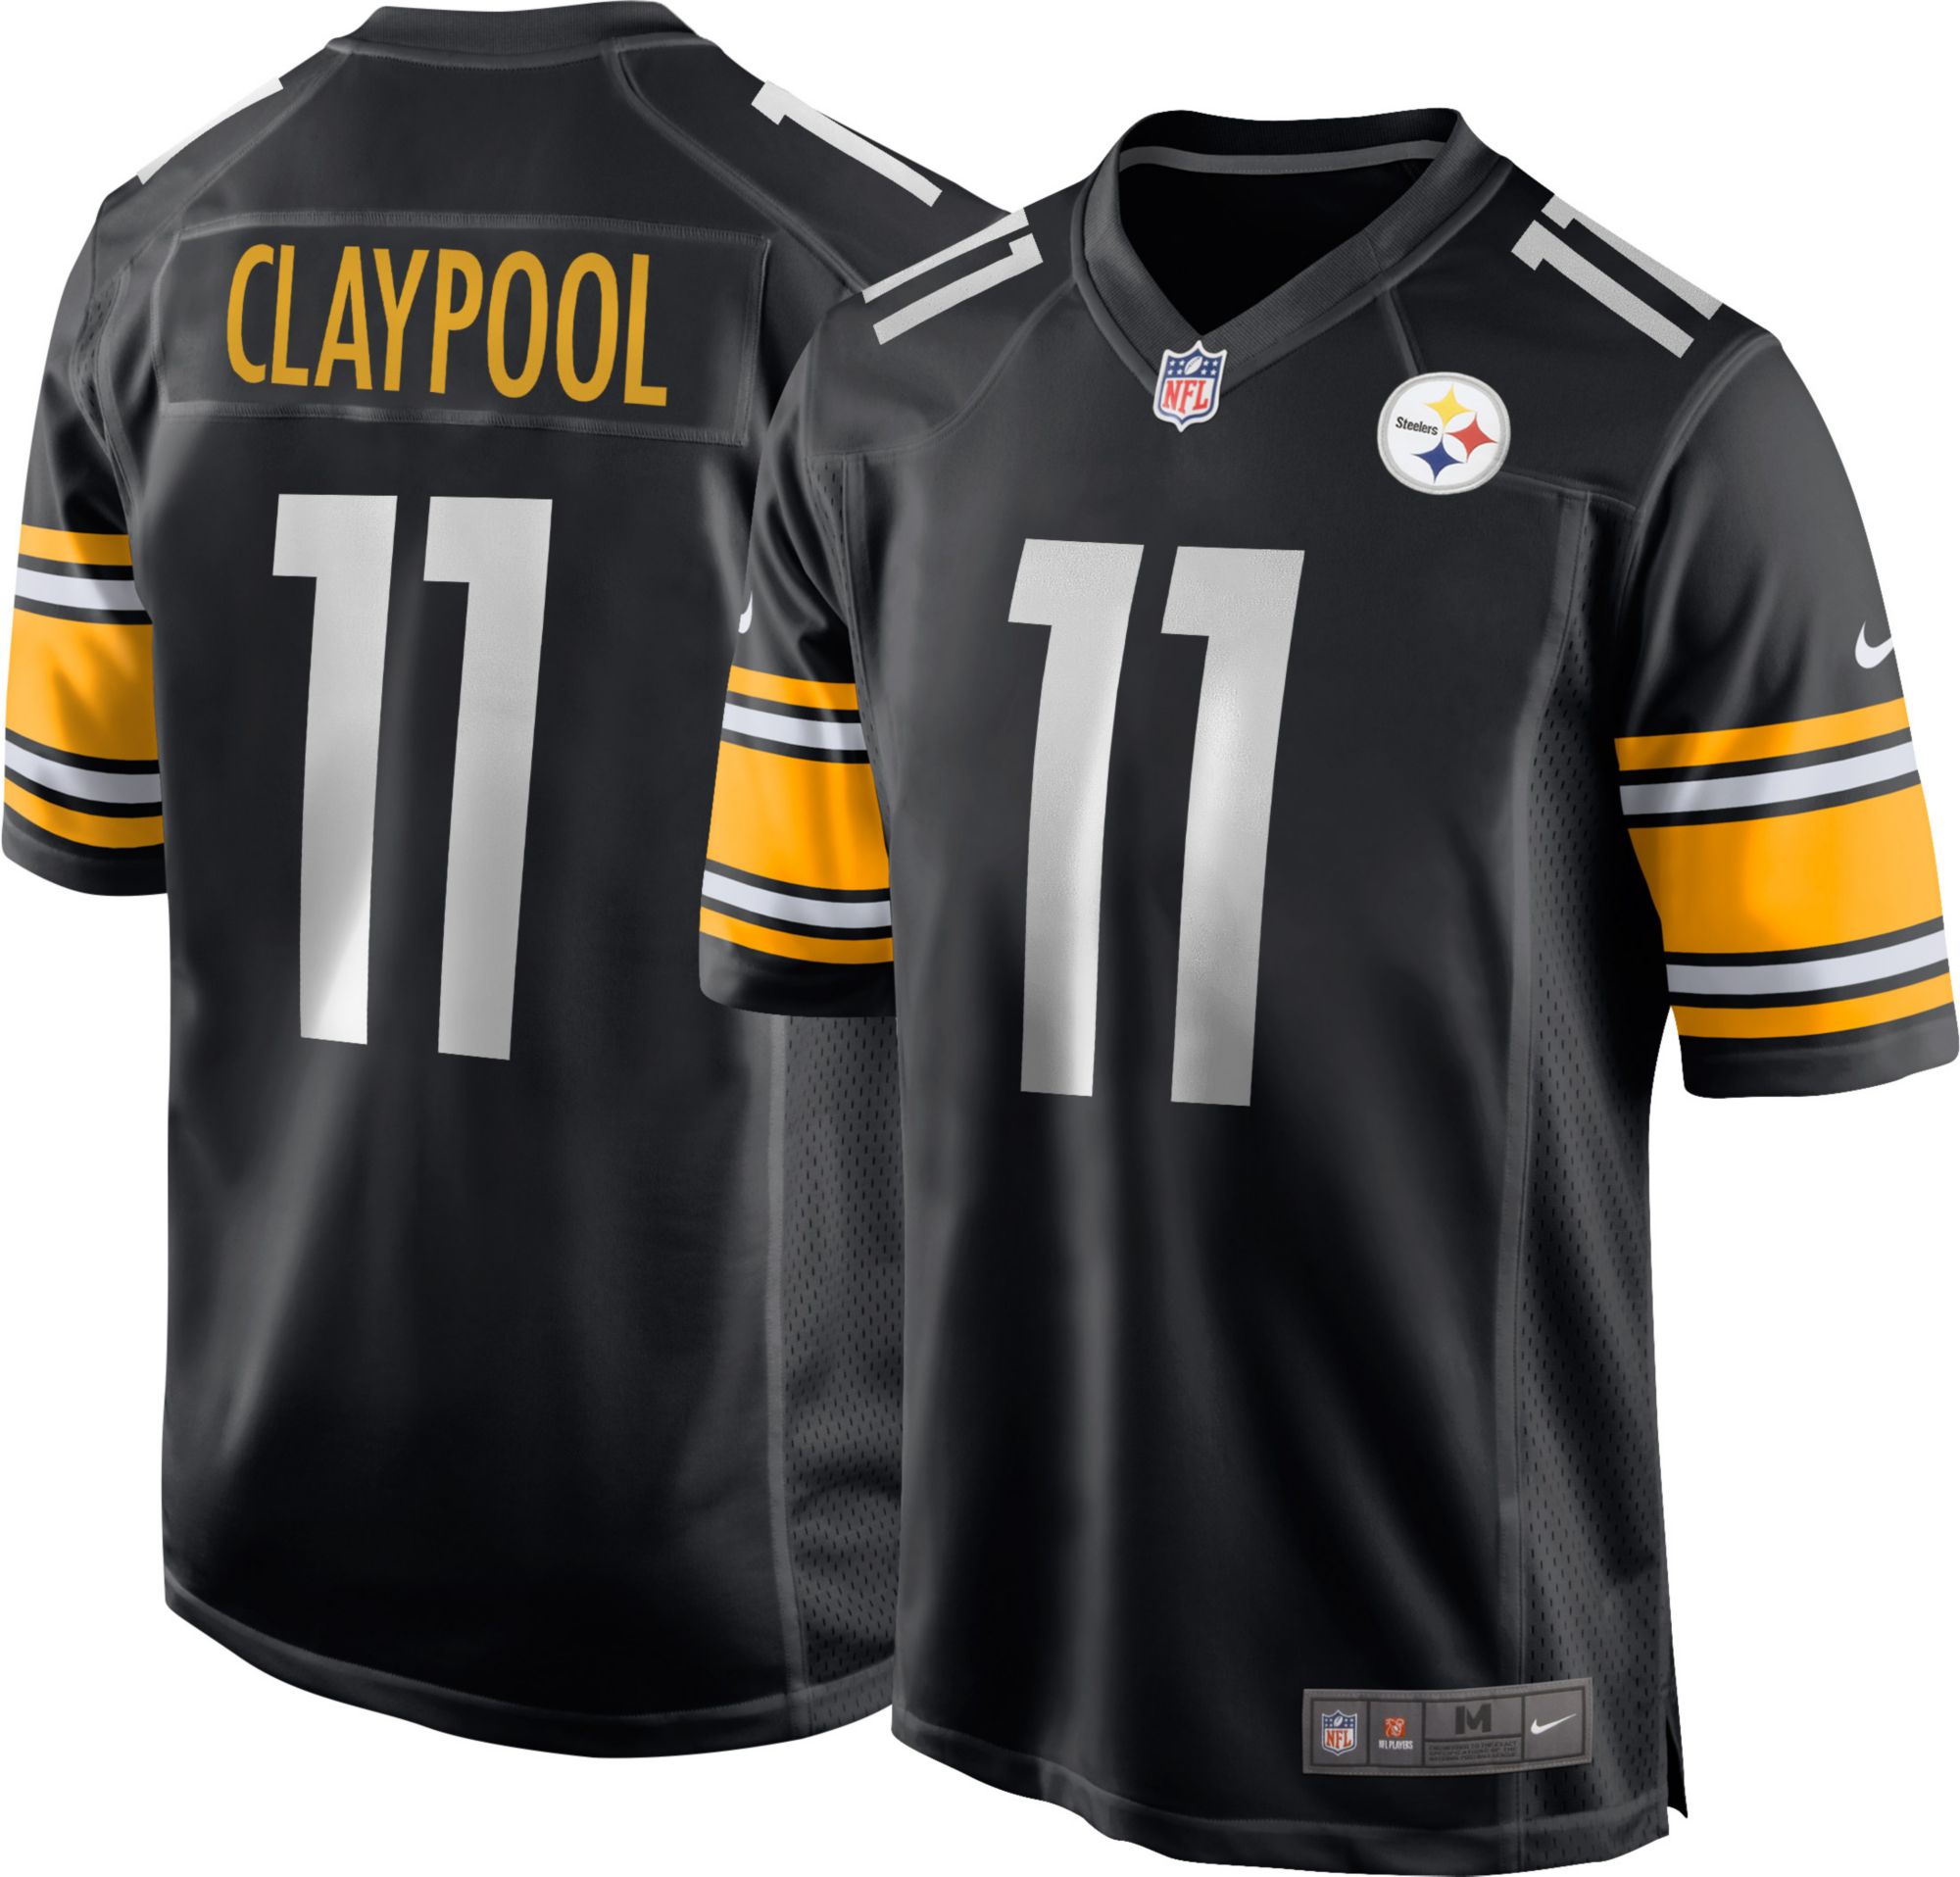 NFL Pittsburgh Steelers (Chase Claypool) Women's Game Football Jersey.